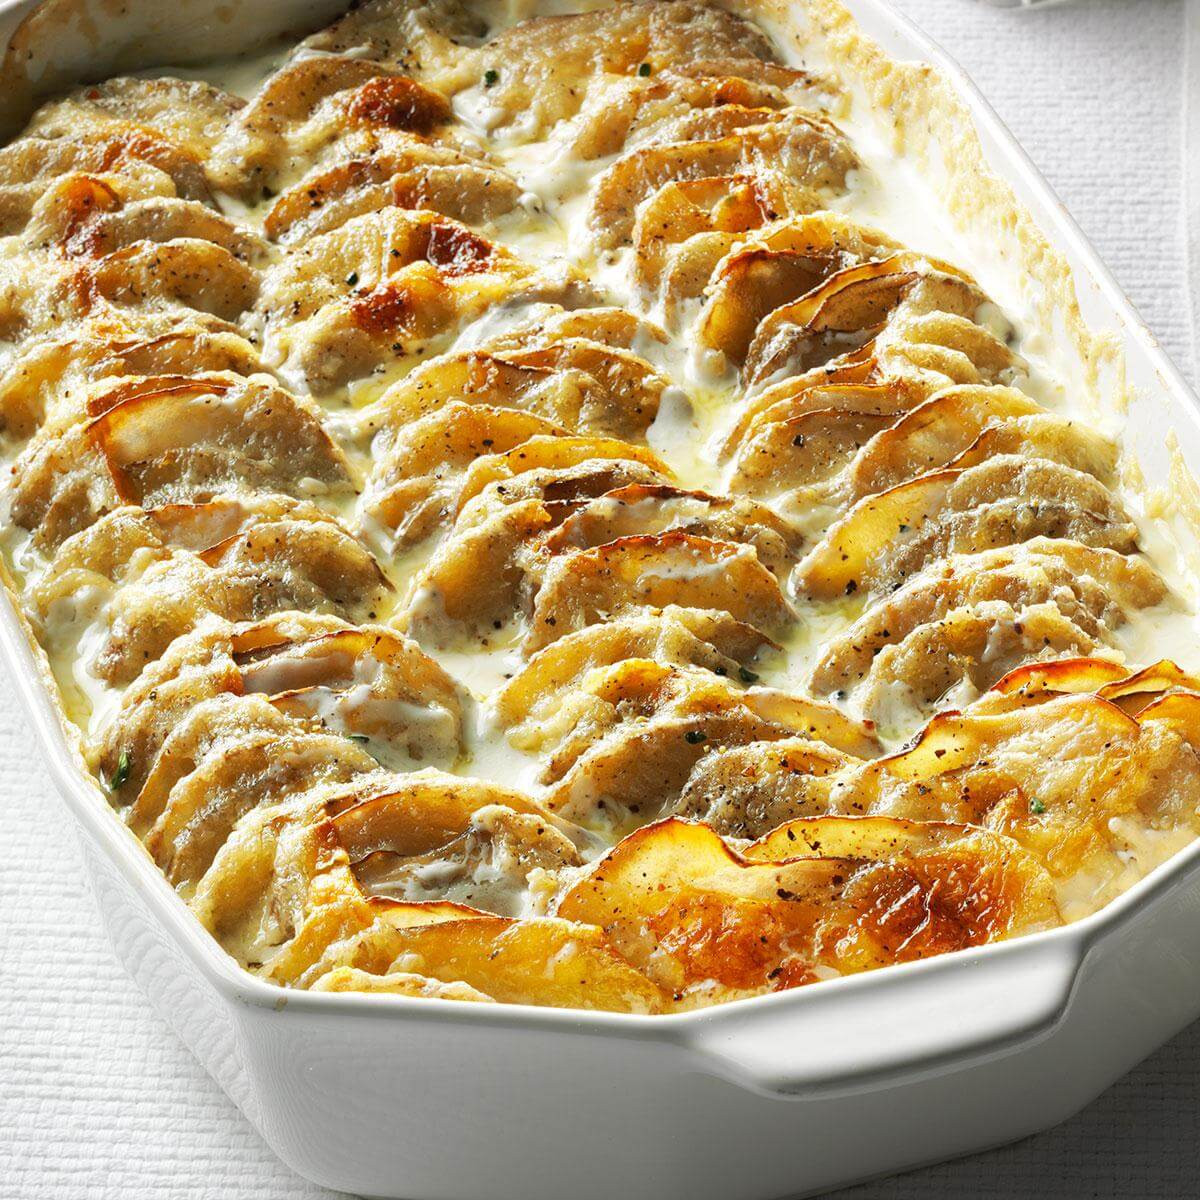 Potatoes Thanksgiving Side Dishes
 Super Simple Scalloped Potatoes Recipe